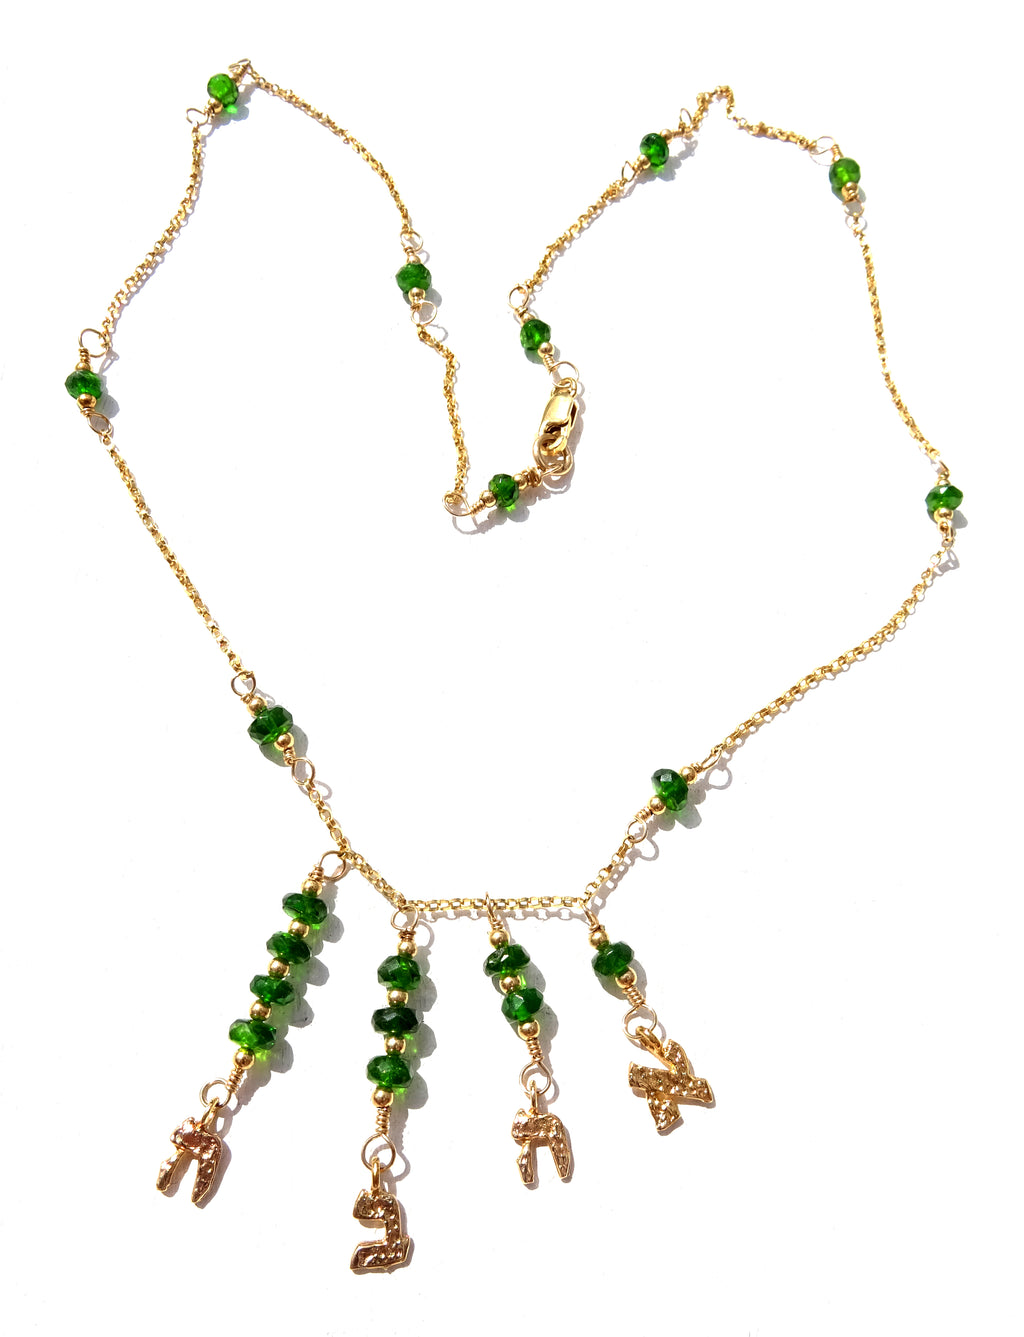 Gold filled necklace with gemstones,Tsavorite with hebrew letters of love Ahava